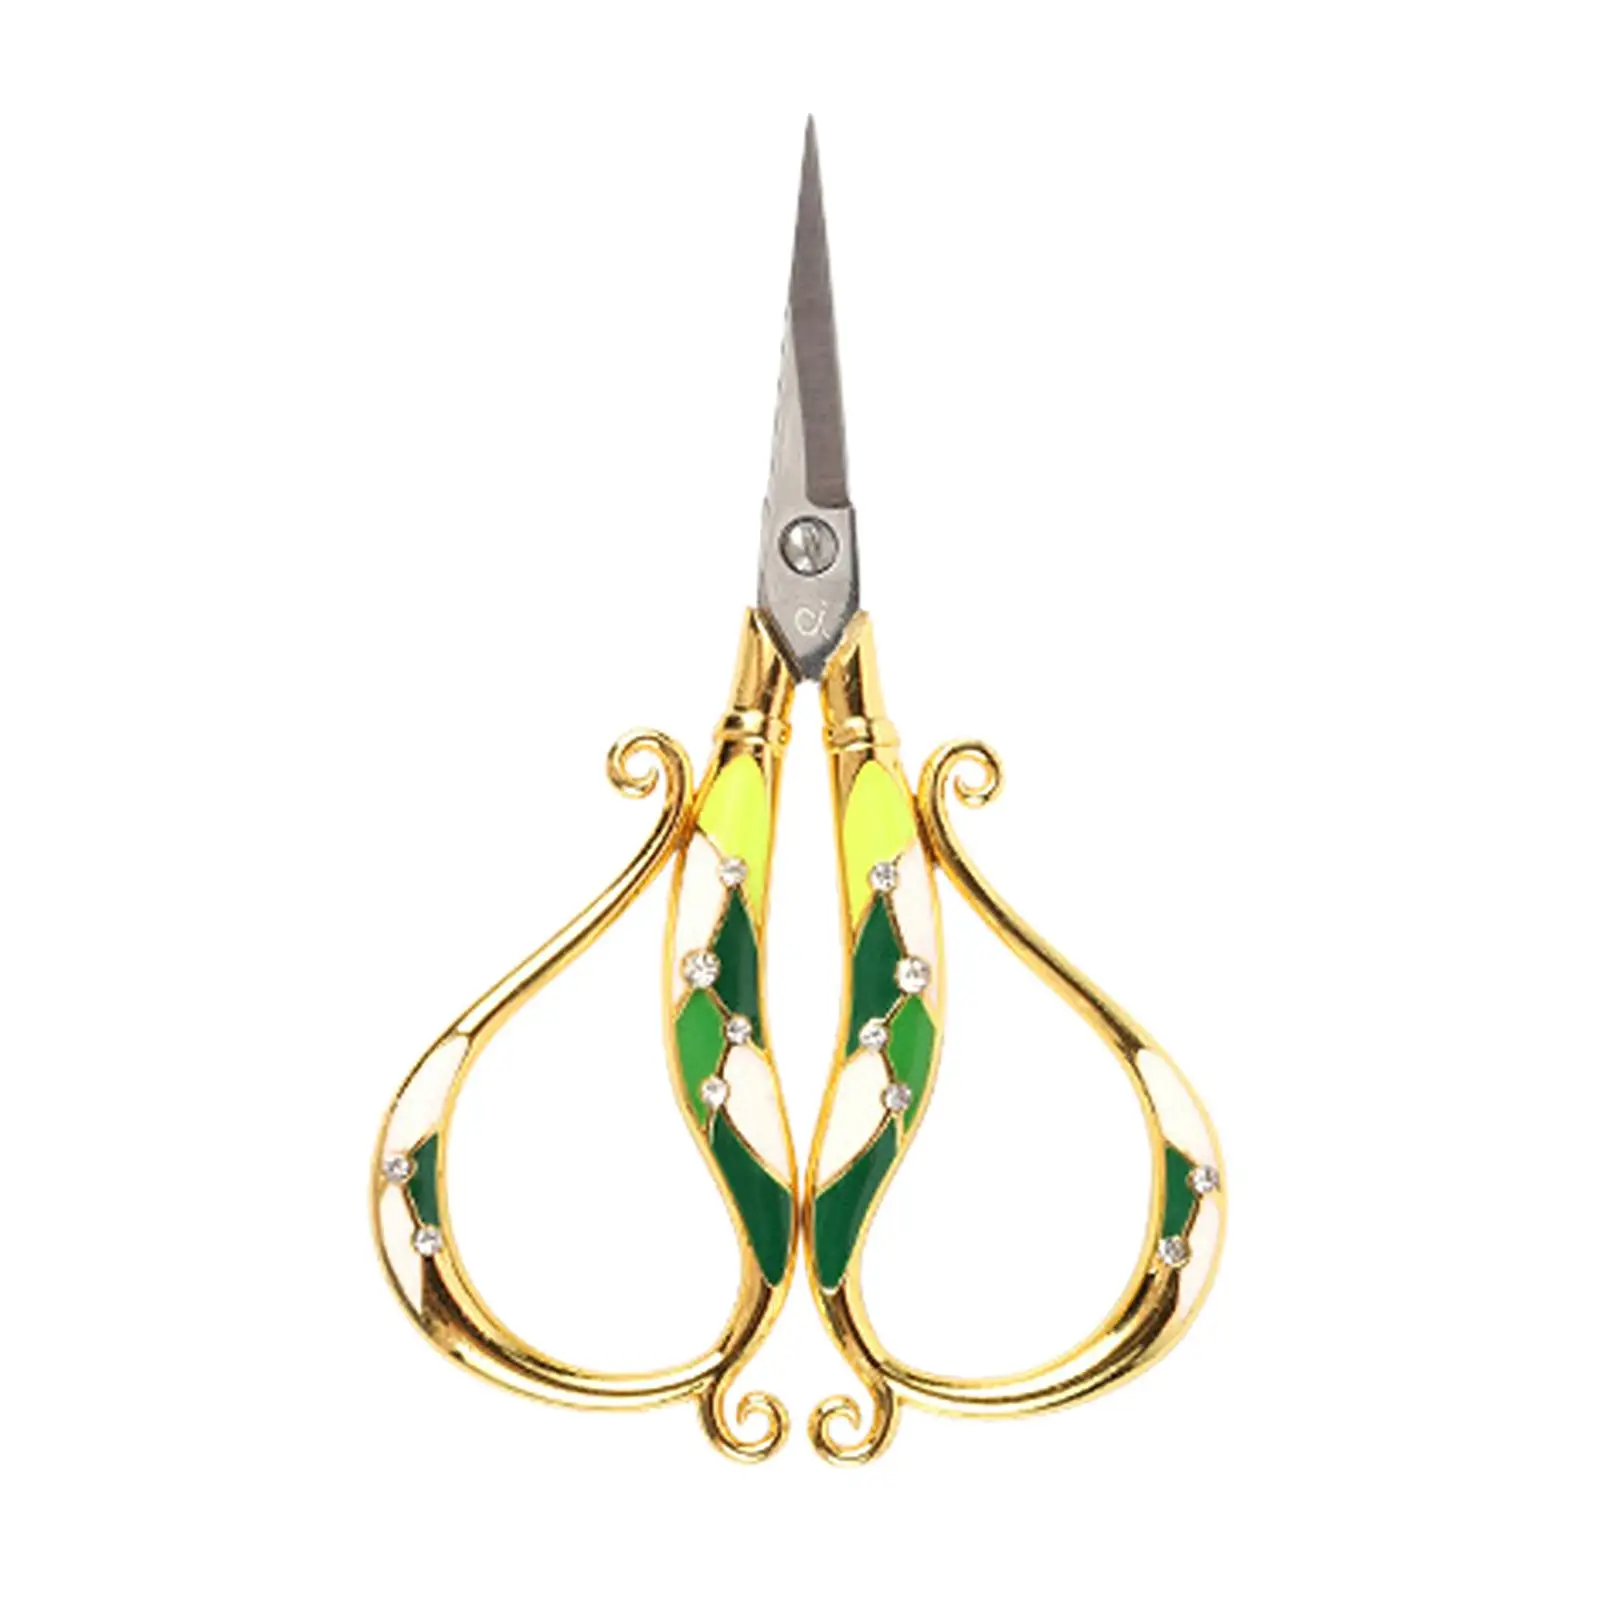 Sewing Scissors Sewing Needlework Durable Sewing Accessory Household European Handicrafts Embroidery Scissors Tailor Scissors